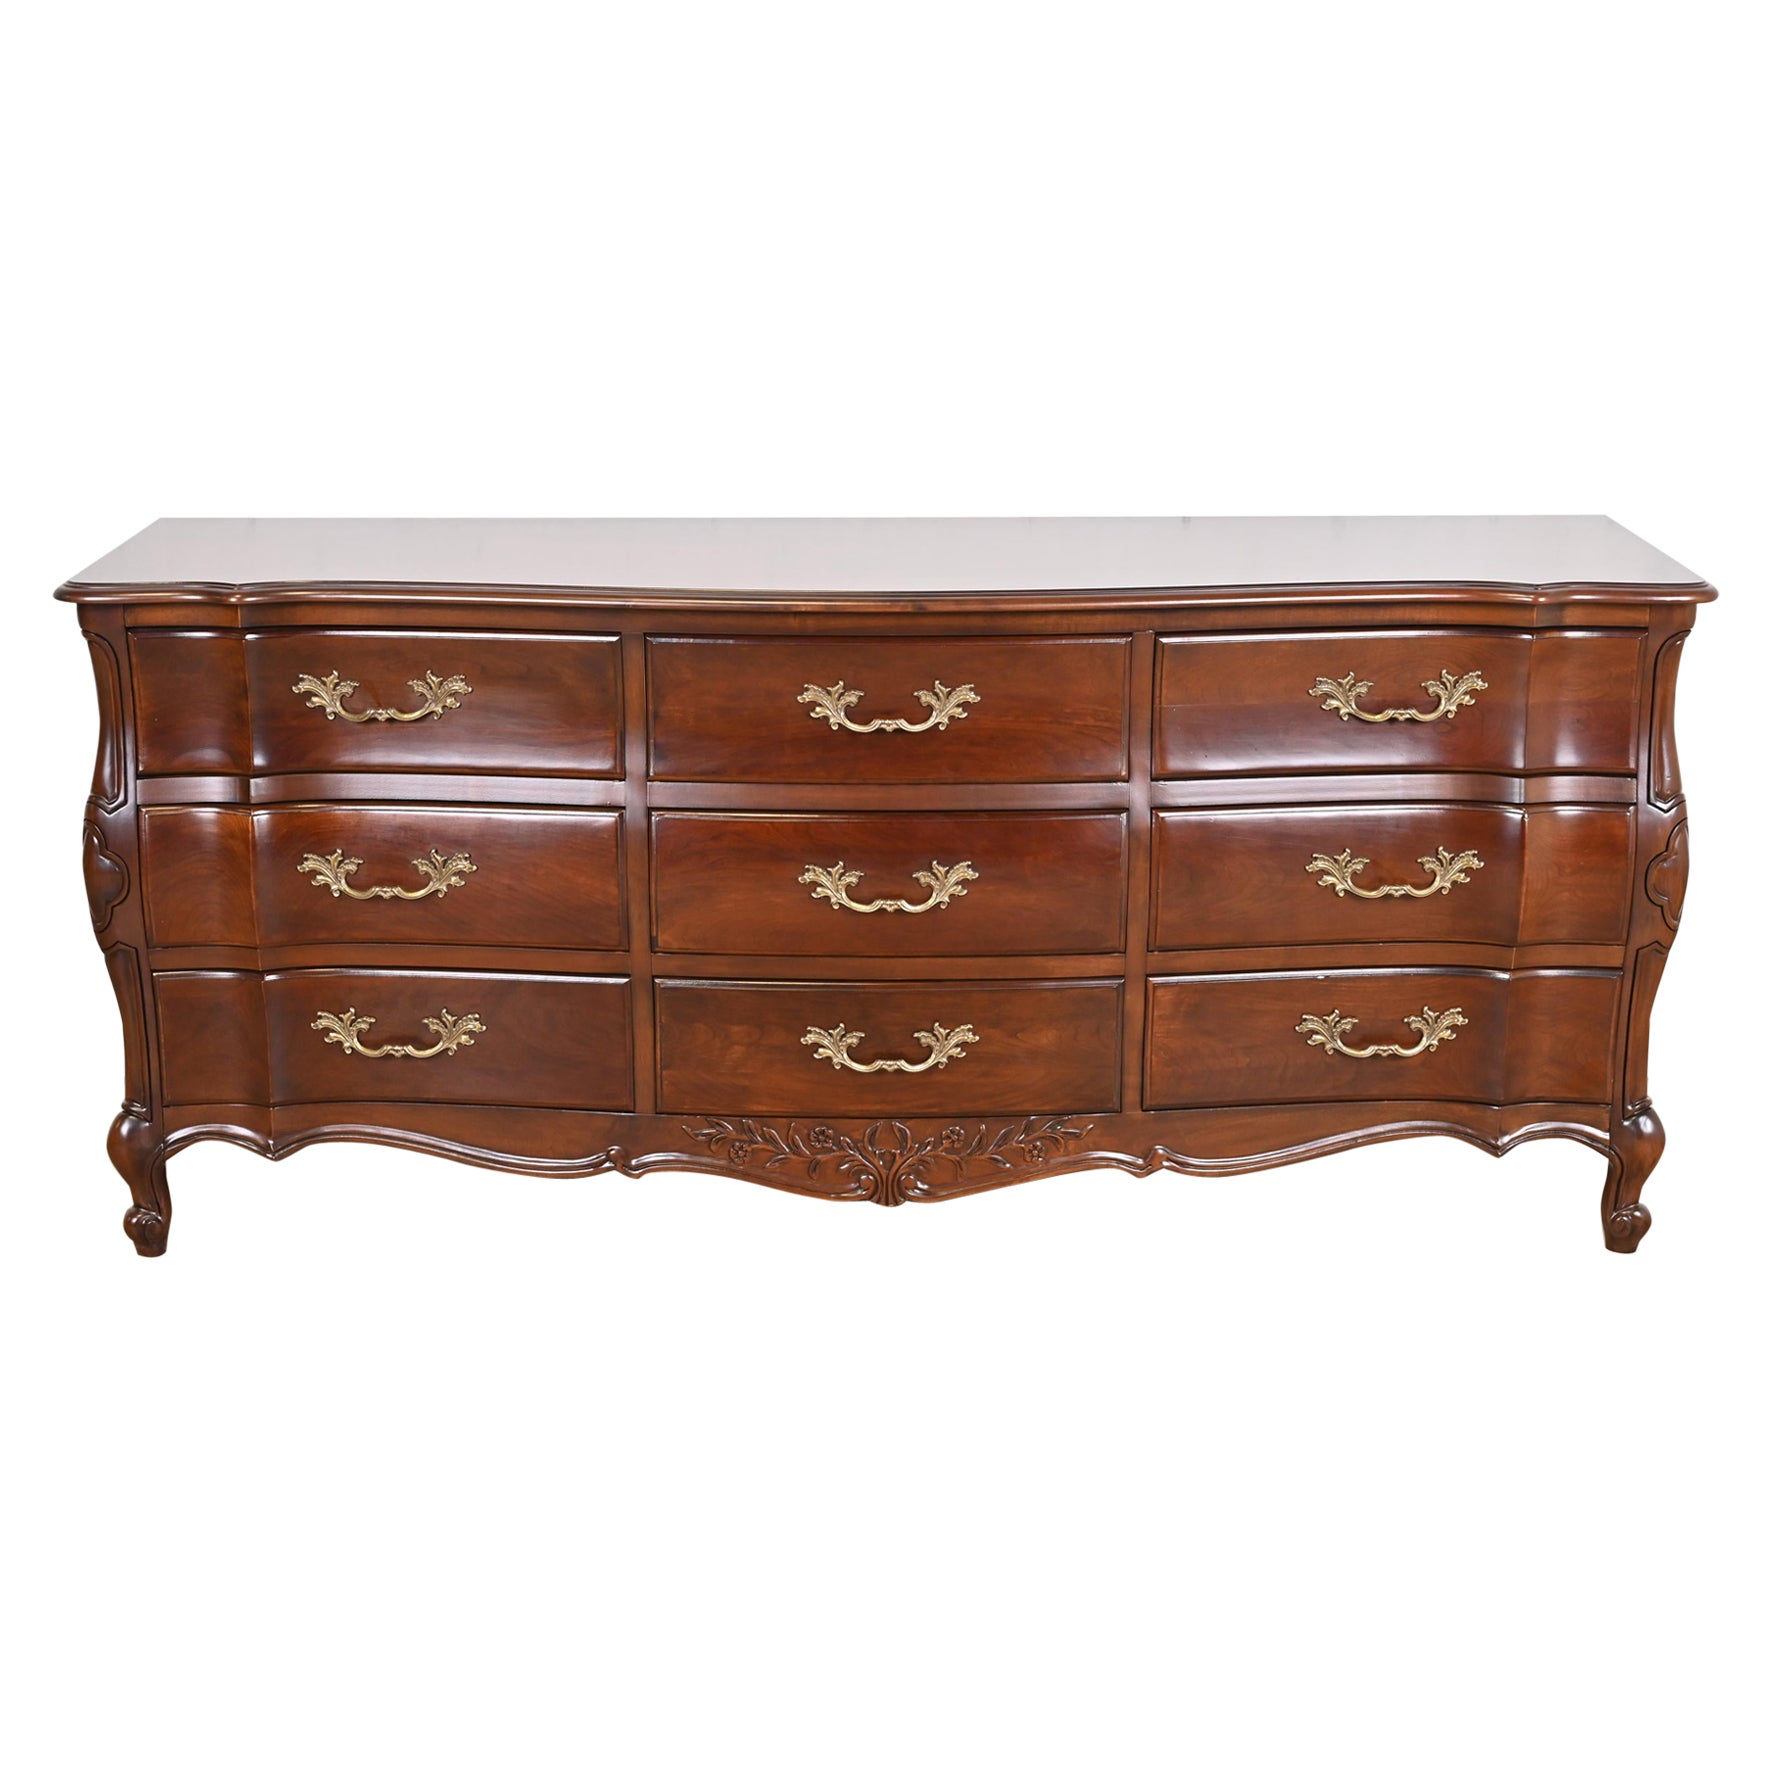 French Provincial Louis XV Cherry Wood Dresser by White Furniture, Refinished